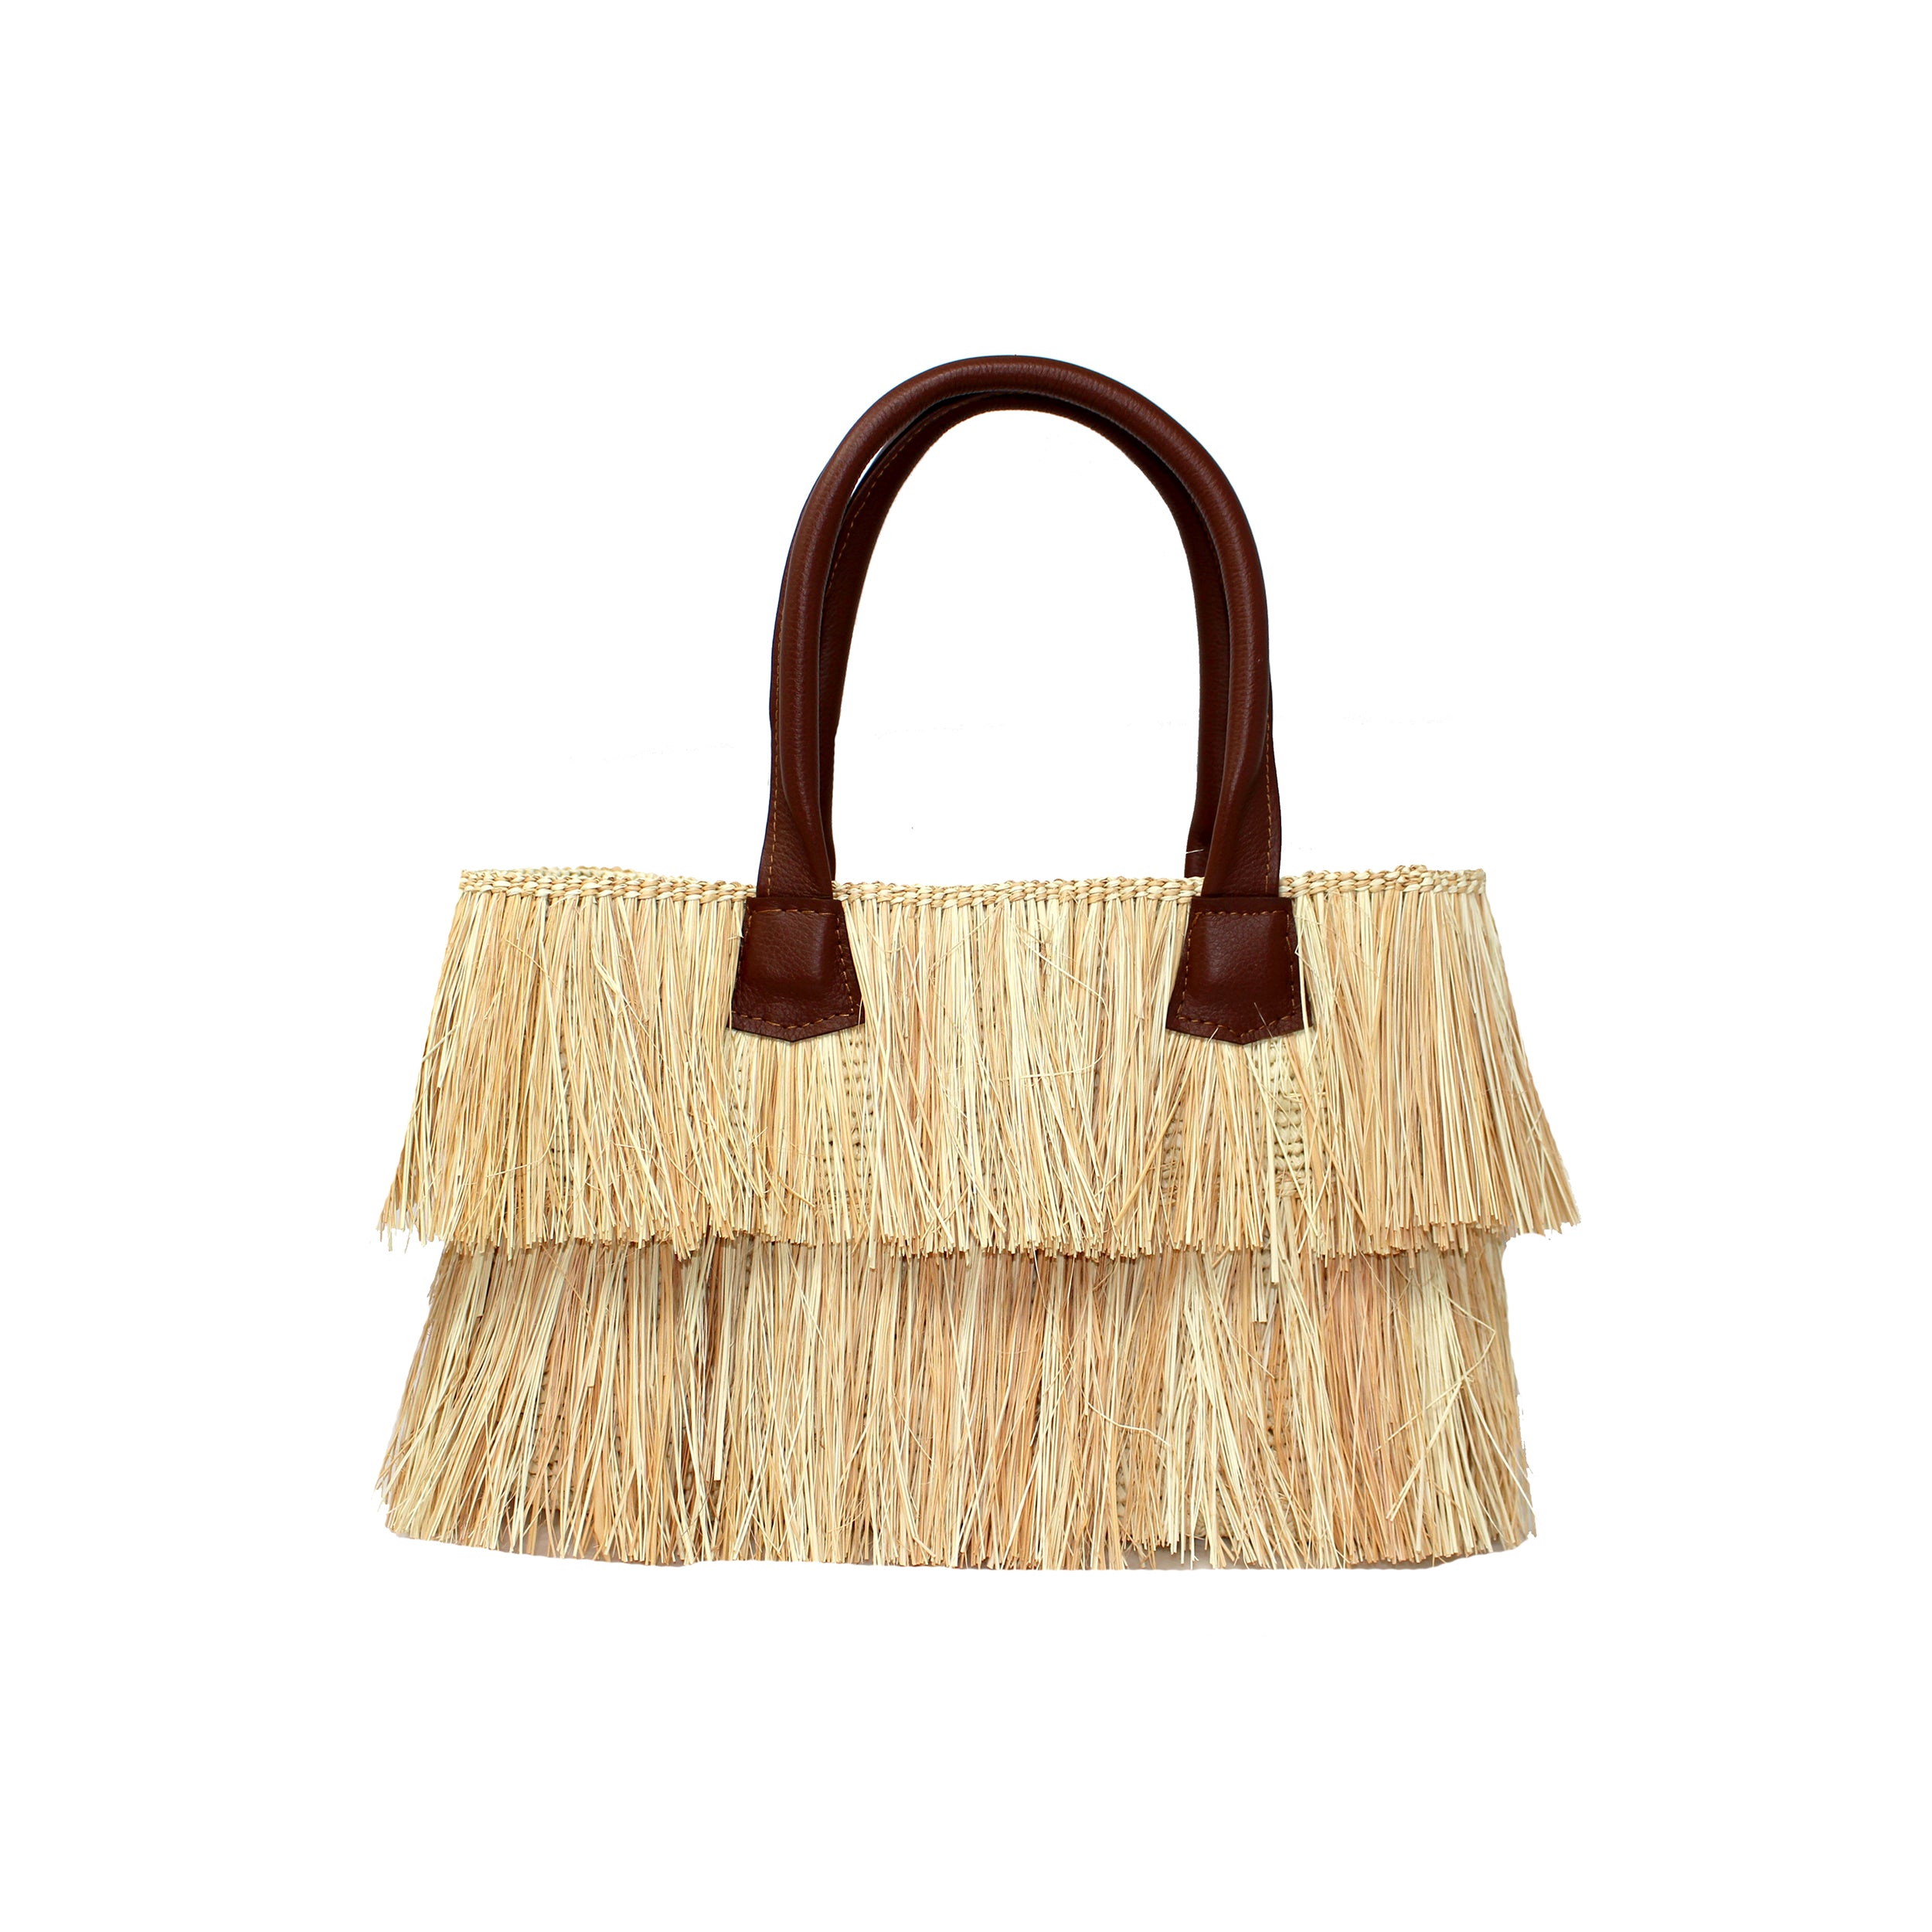 Straw Bags of Summertime : What's New at Lisi Lerch - Lisi Lerch